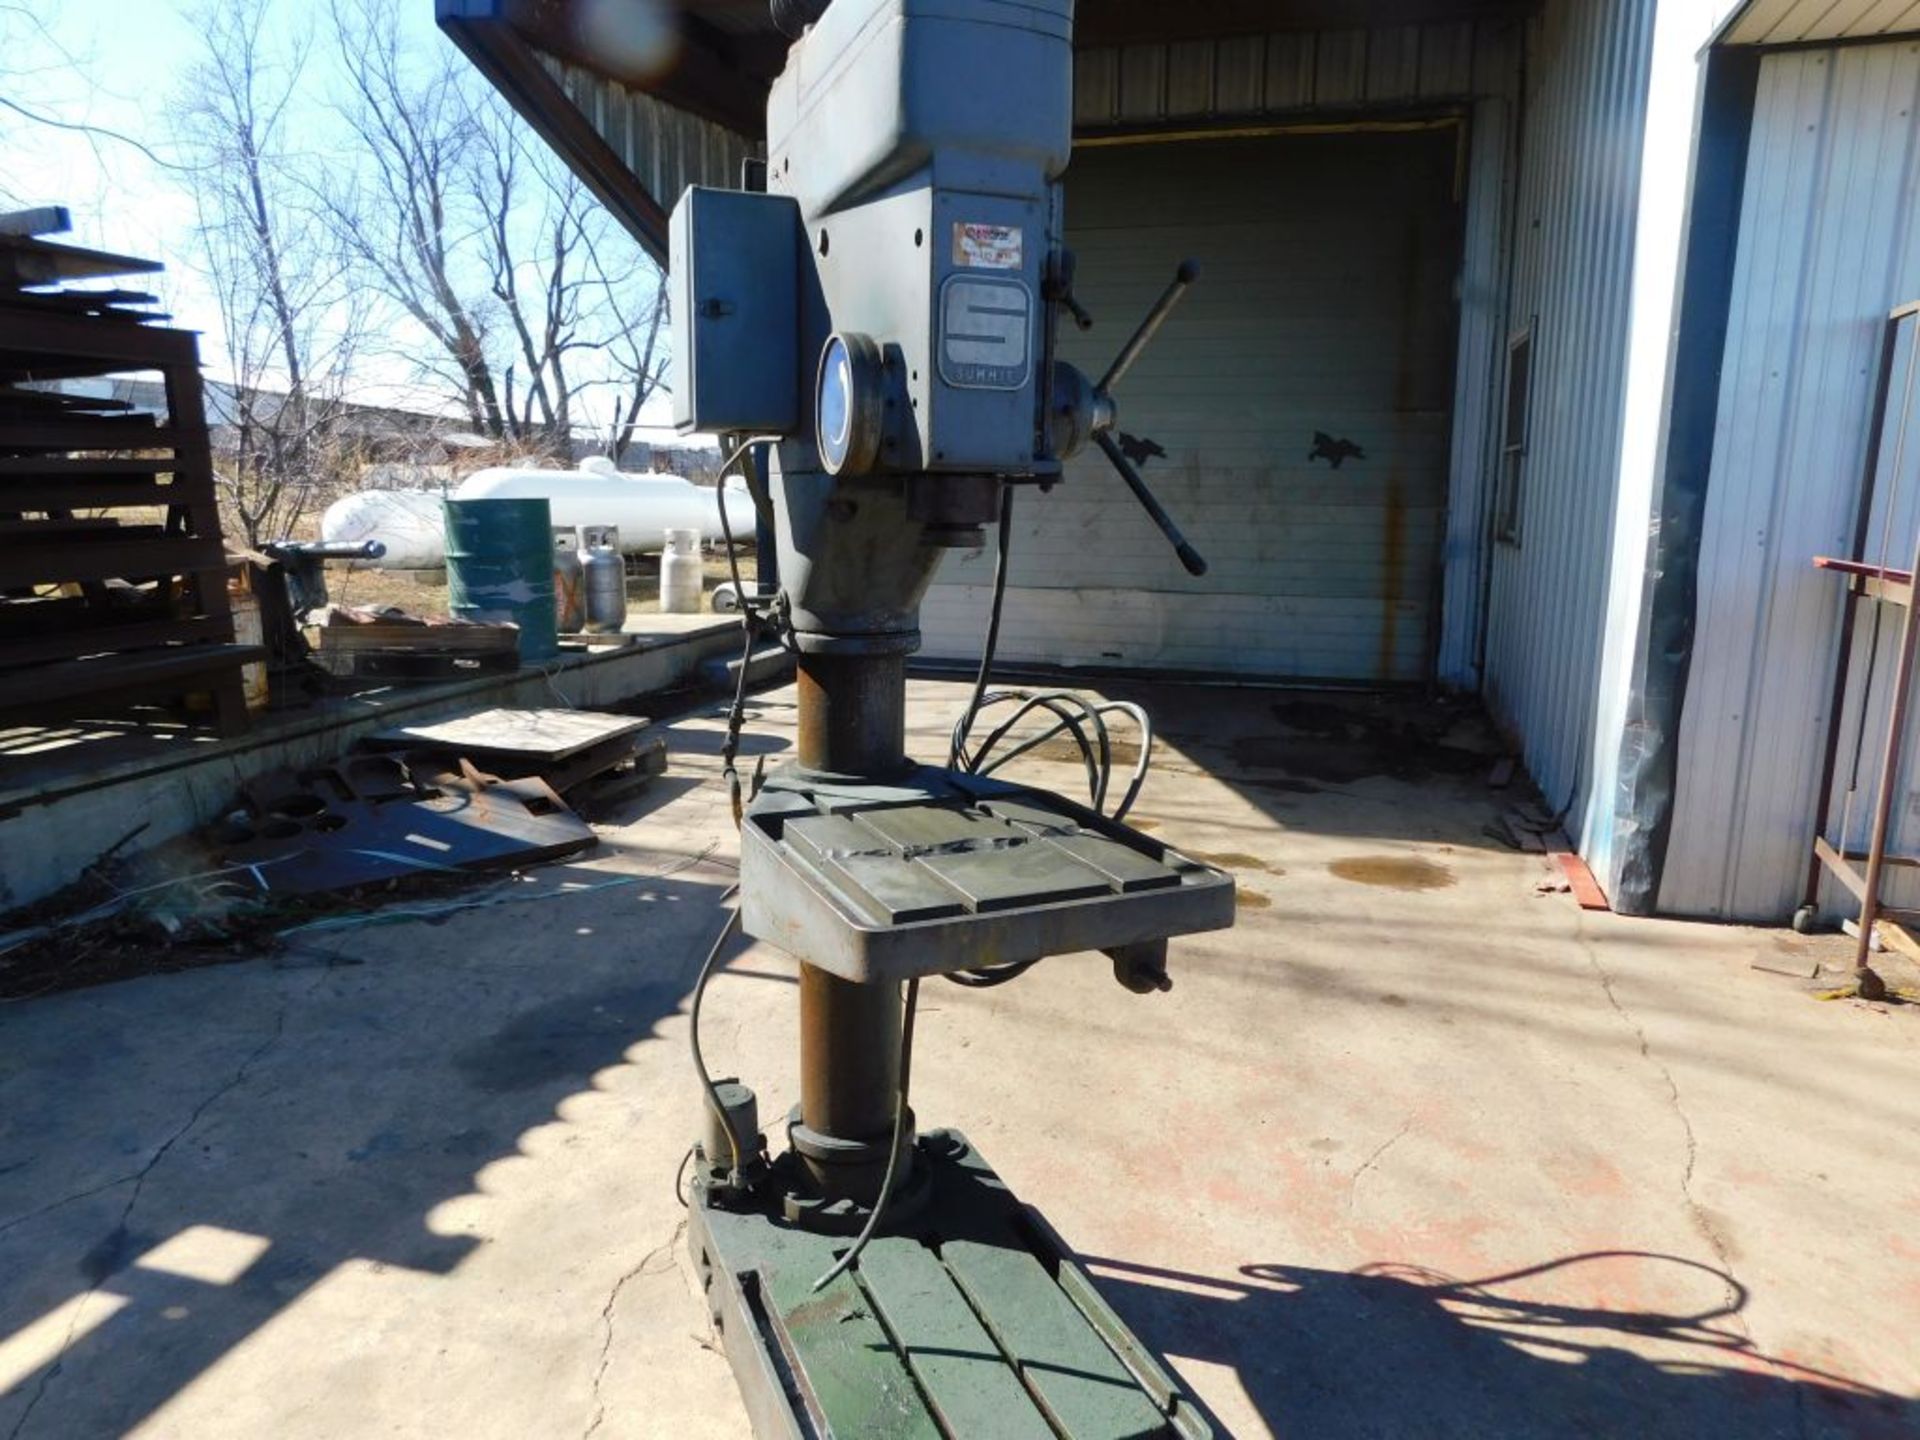 Summitt drill press, model 59R, sn 731206, 3 ph. (LOCATED AT and to be picked up at: 3341 Addison - Image 4 of 5